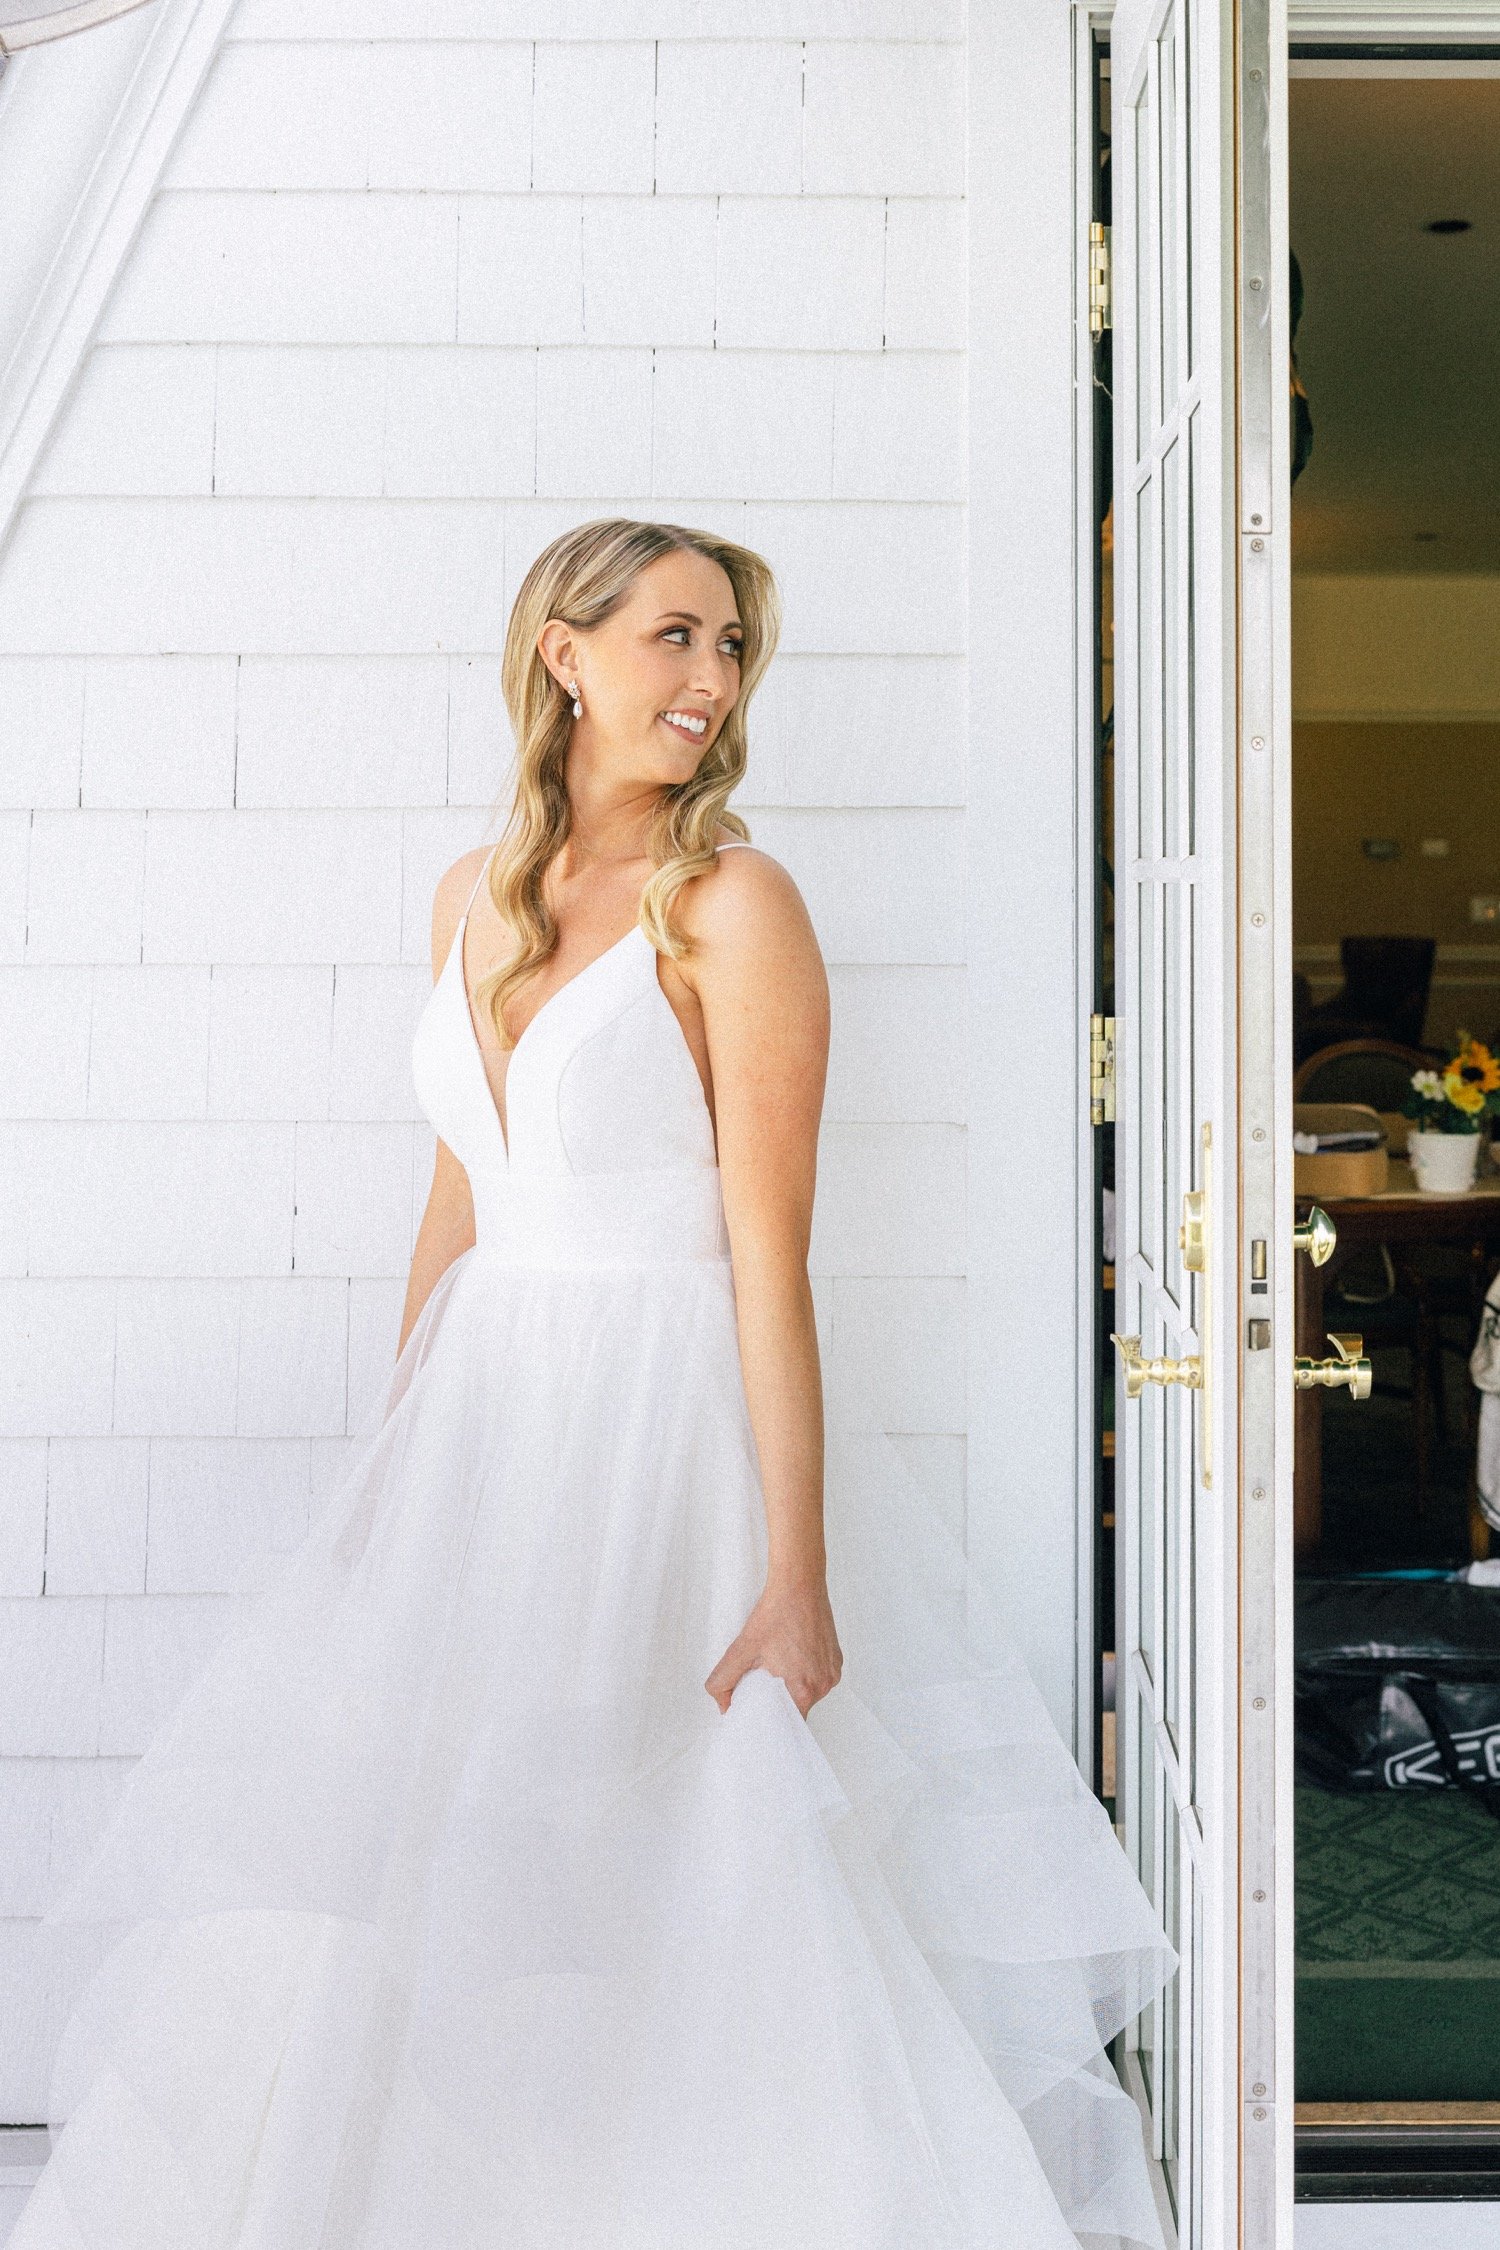  Bride in white dress looks over should while standing in front of white wall 